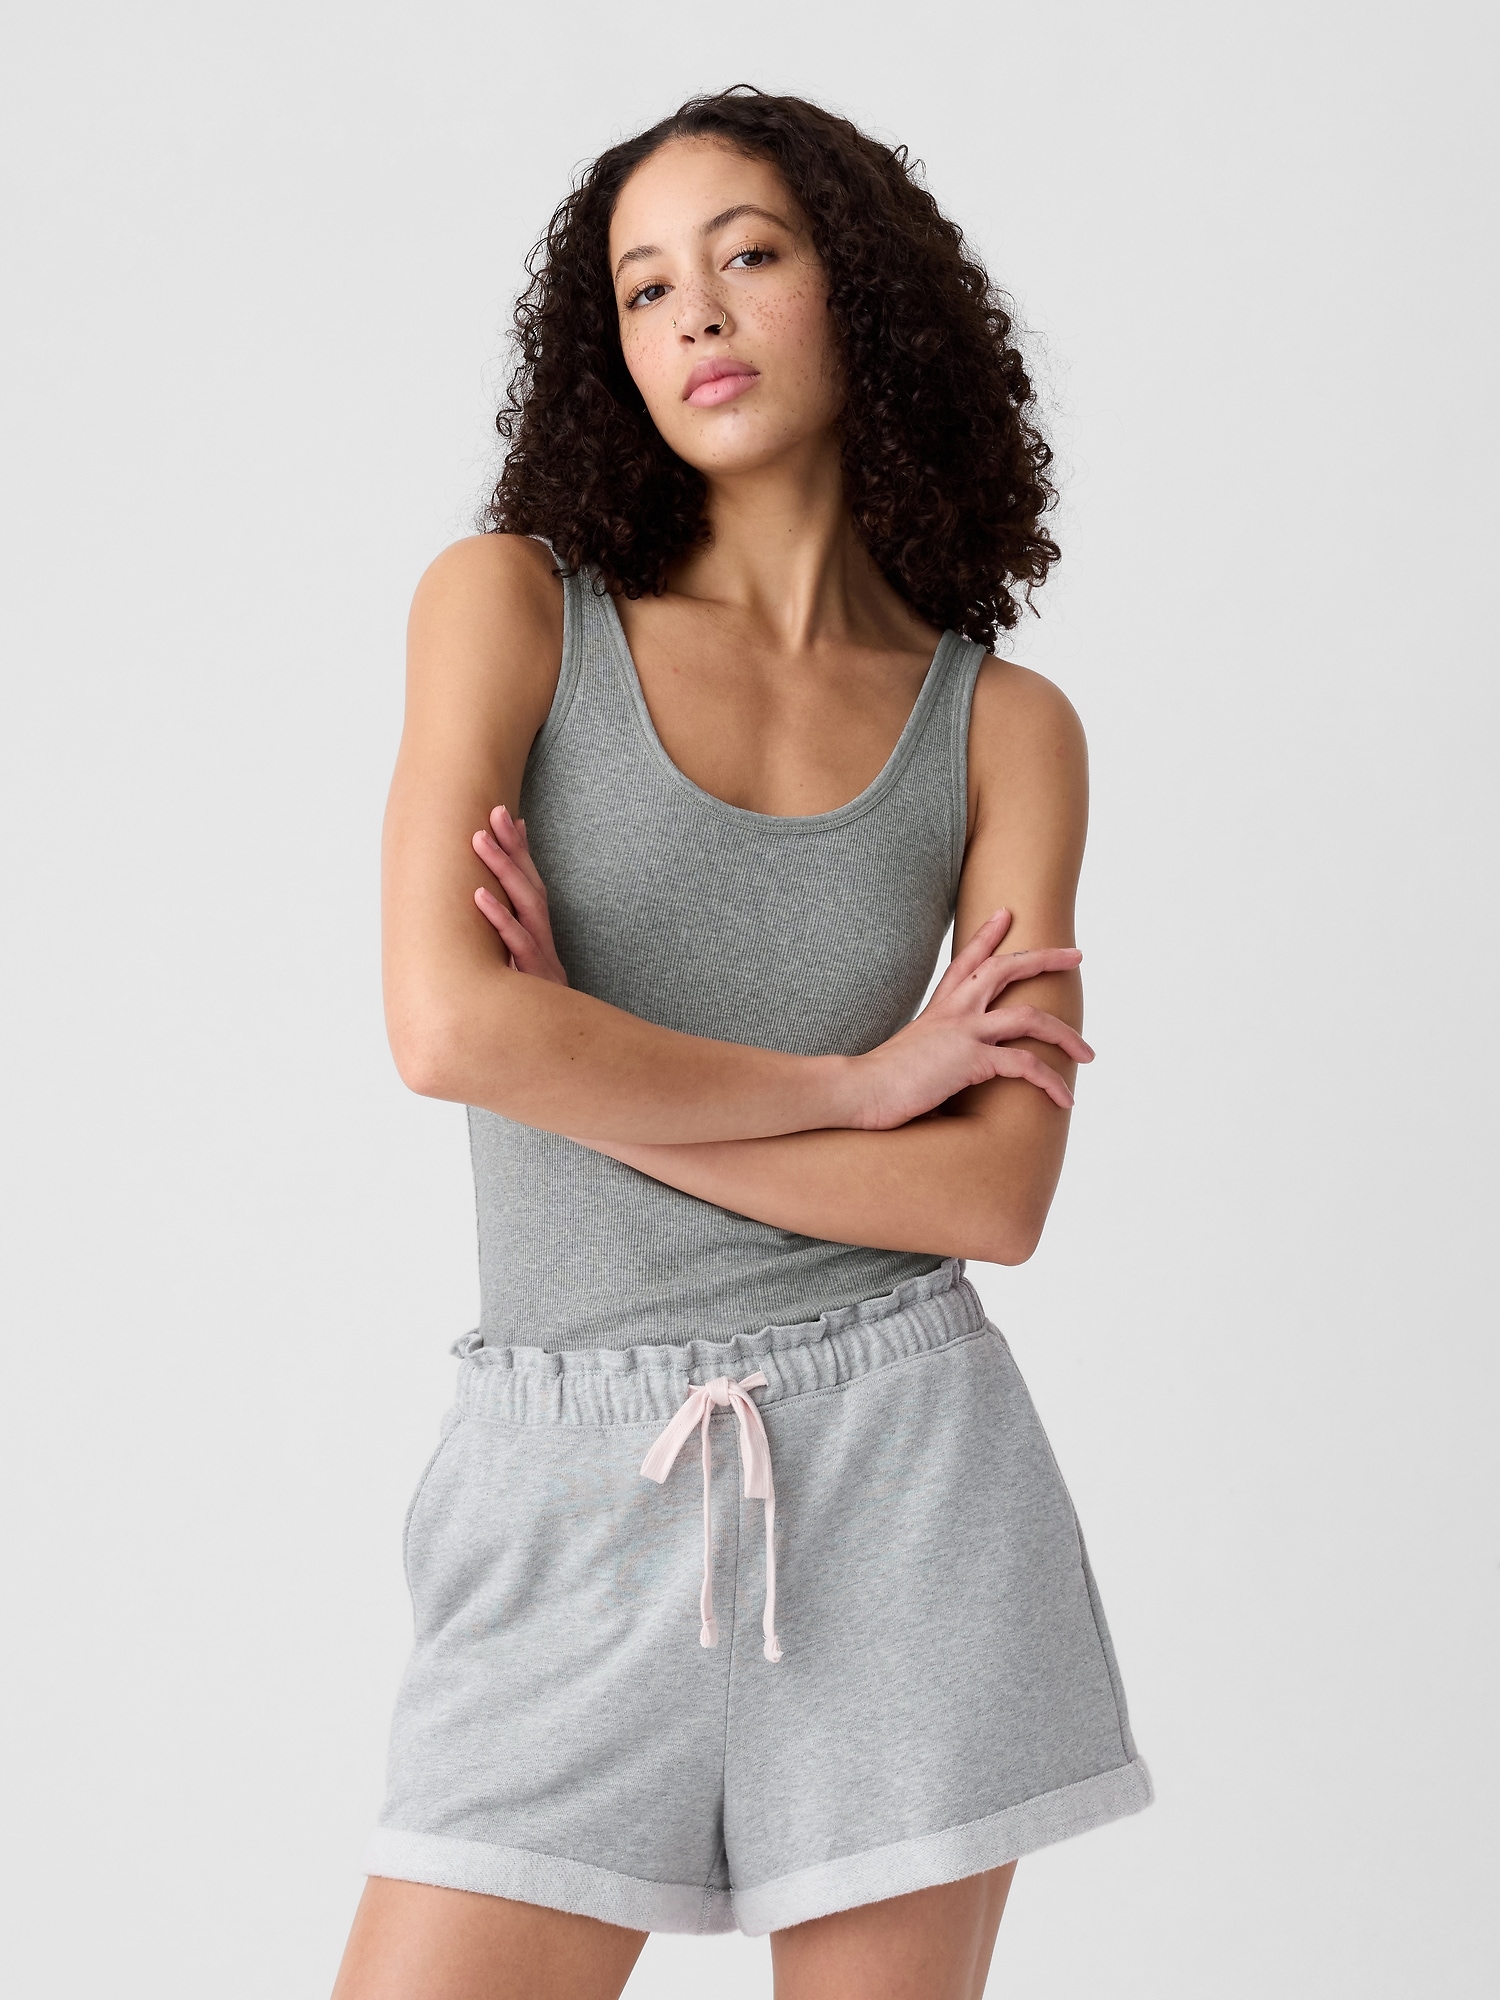 Ribbed Support PJ Tank Top